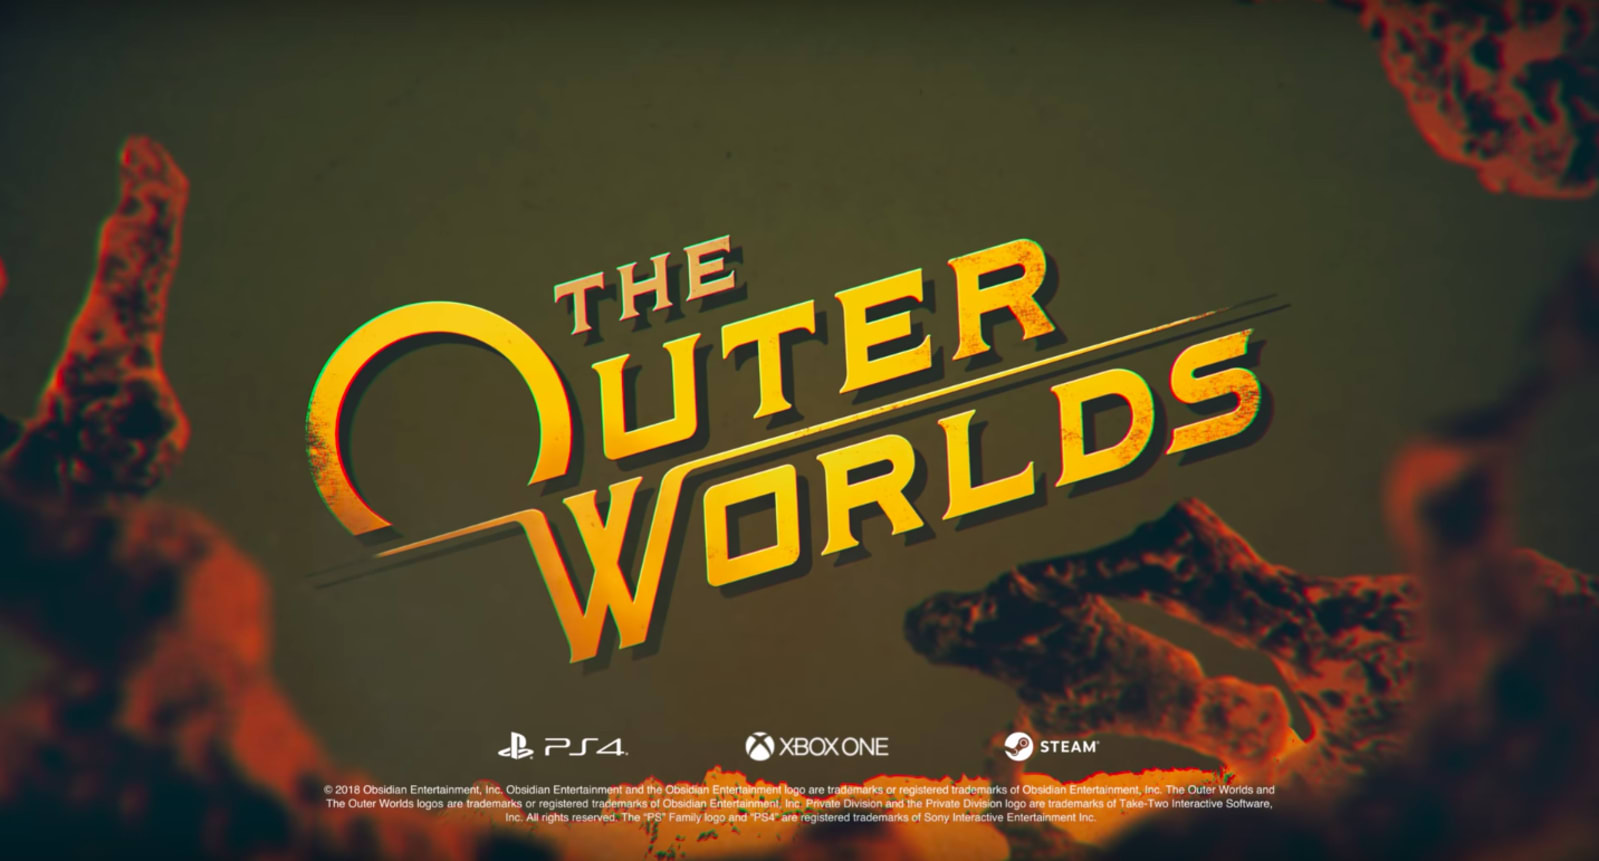 The Outer Worlds reveal trailer